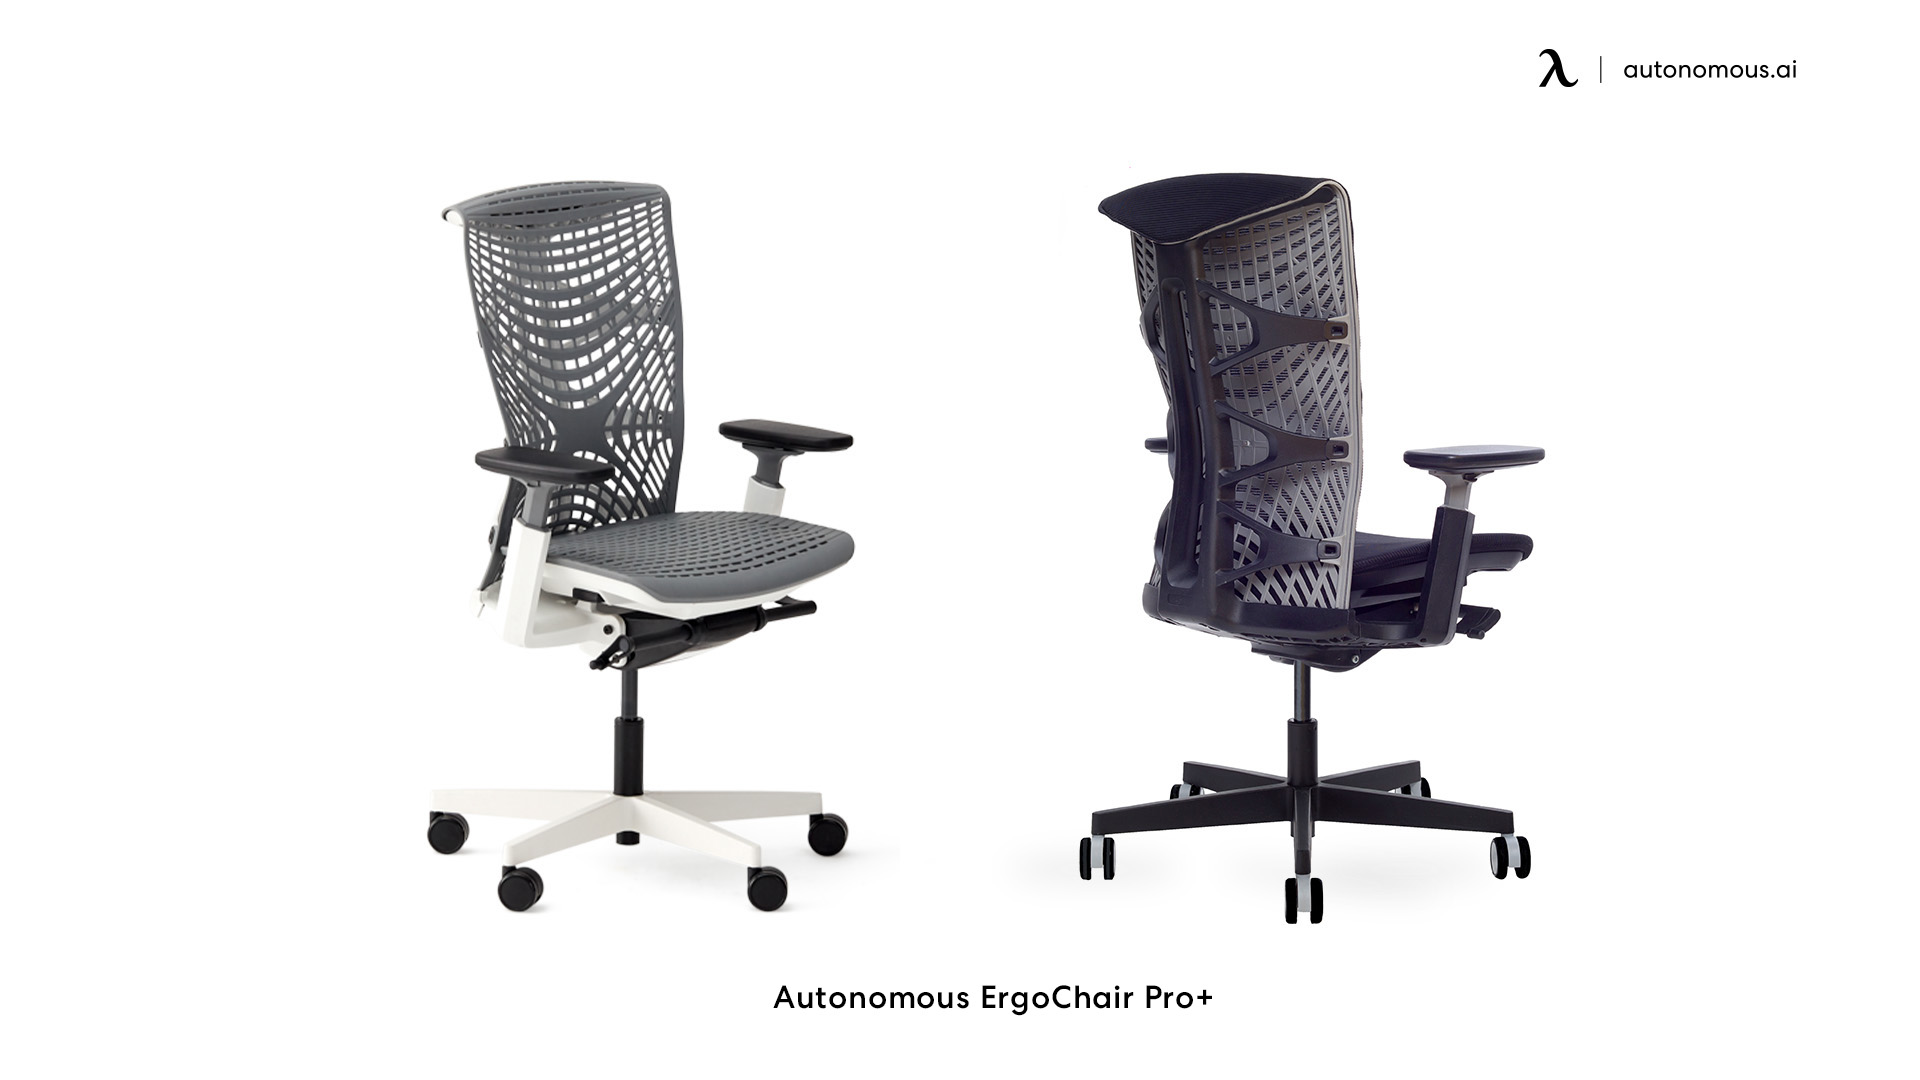 ErgoChair Pro+ home office chair with back support